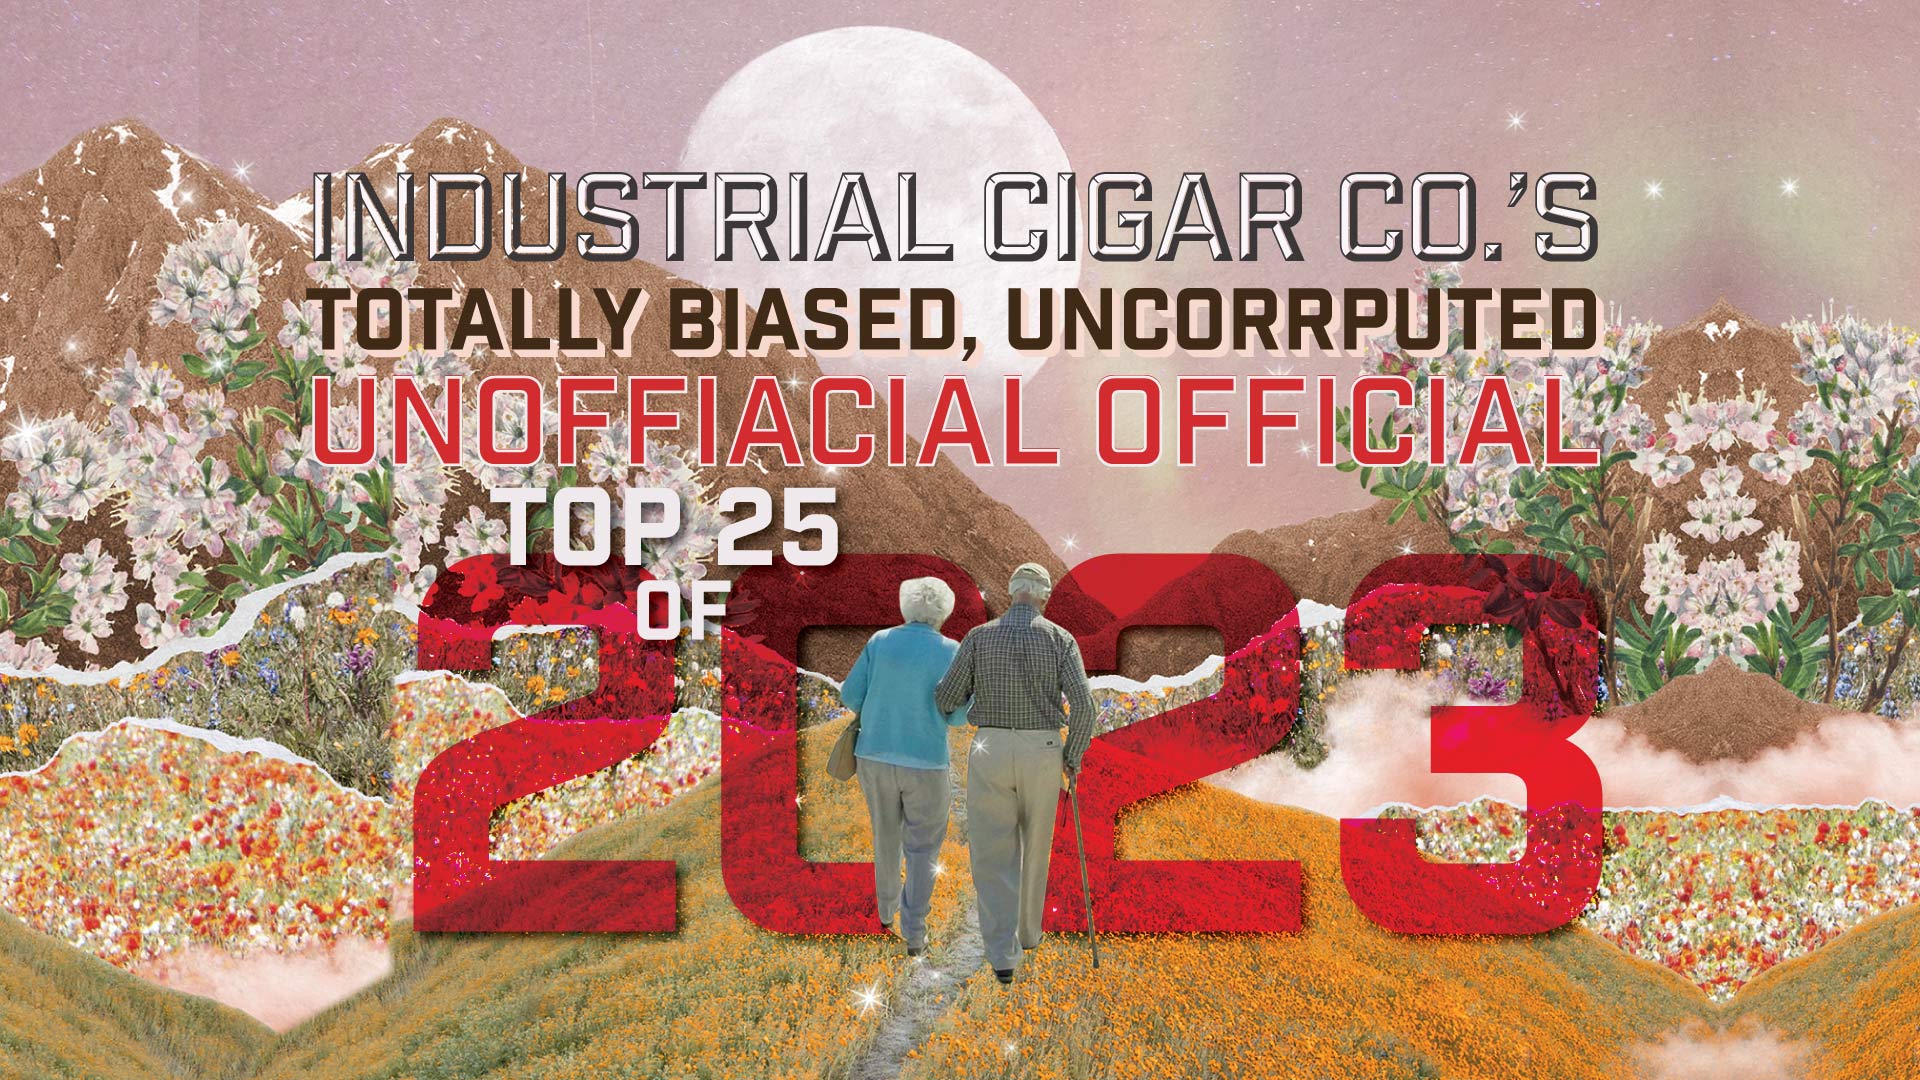 Industrial Cigar Co.'s Totally Biased, Uncorrupt, Unofficial Official Top 25 Cigars of 2023